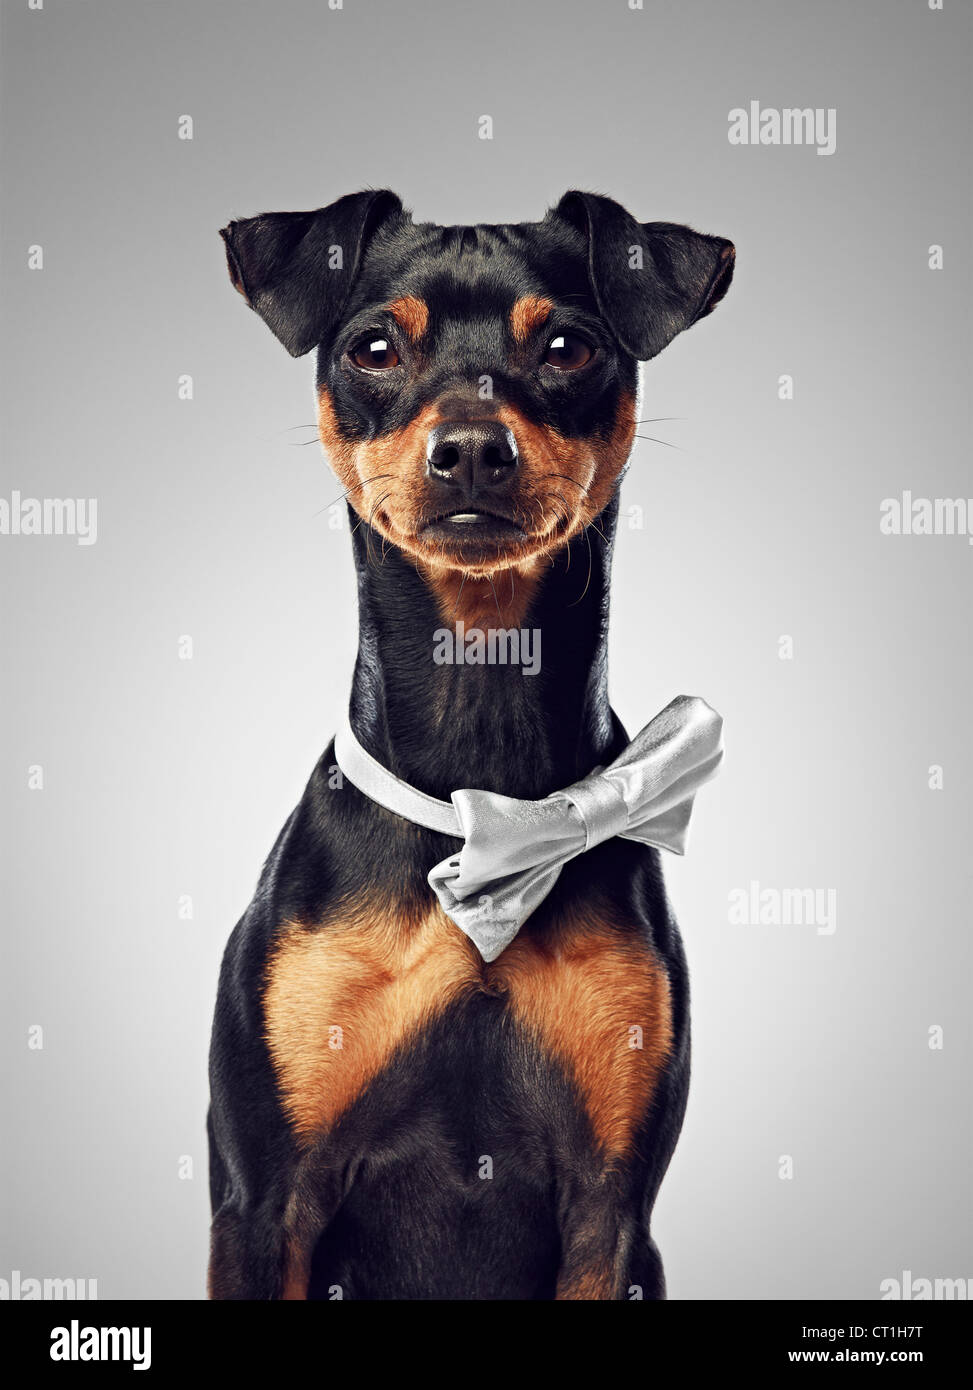 Dog wearing bow tie Stock Photo